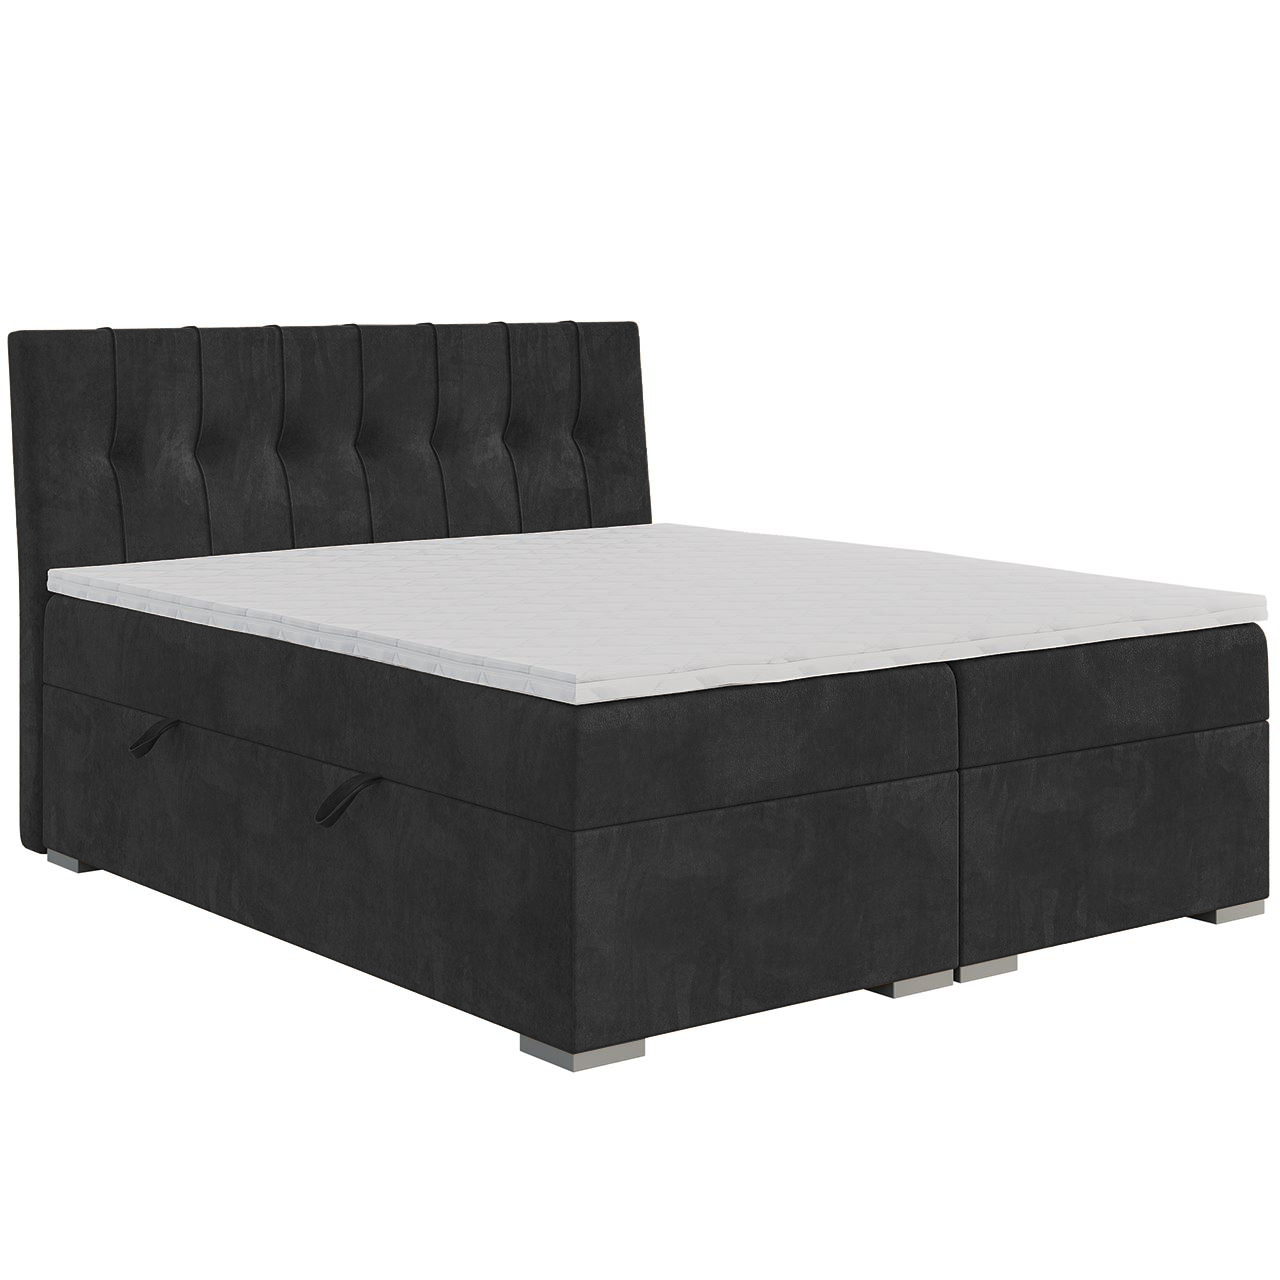 Upholstered bed DANO 180x200 riviera 97